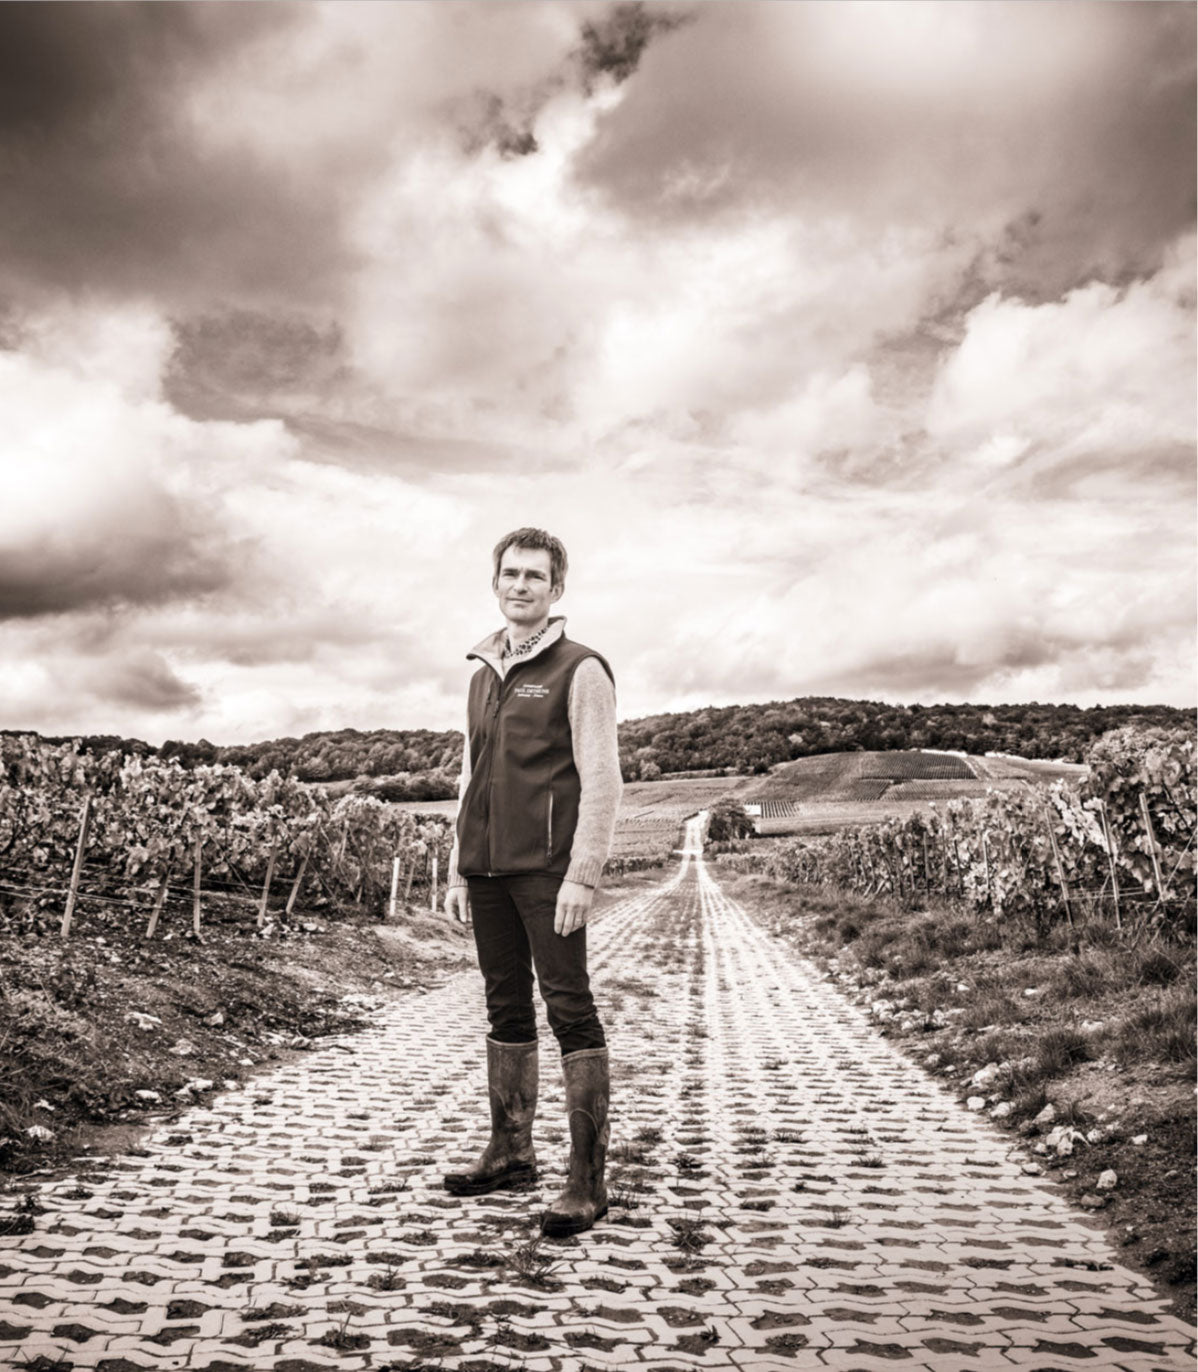 20 Questions with... Pierre Dethune, Champagne Paul Dethune